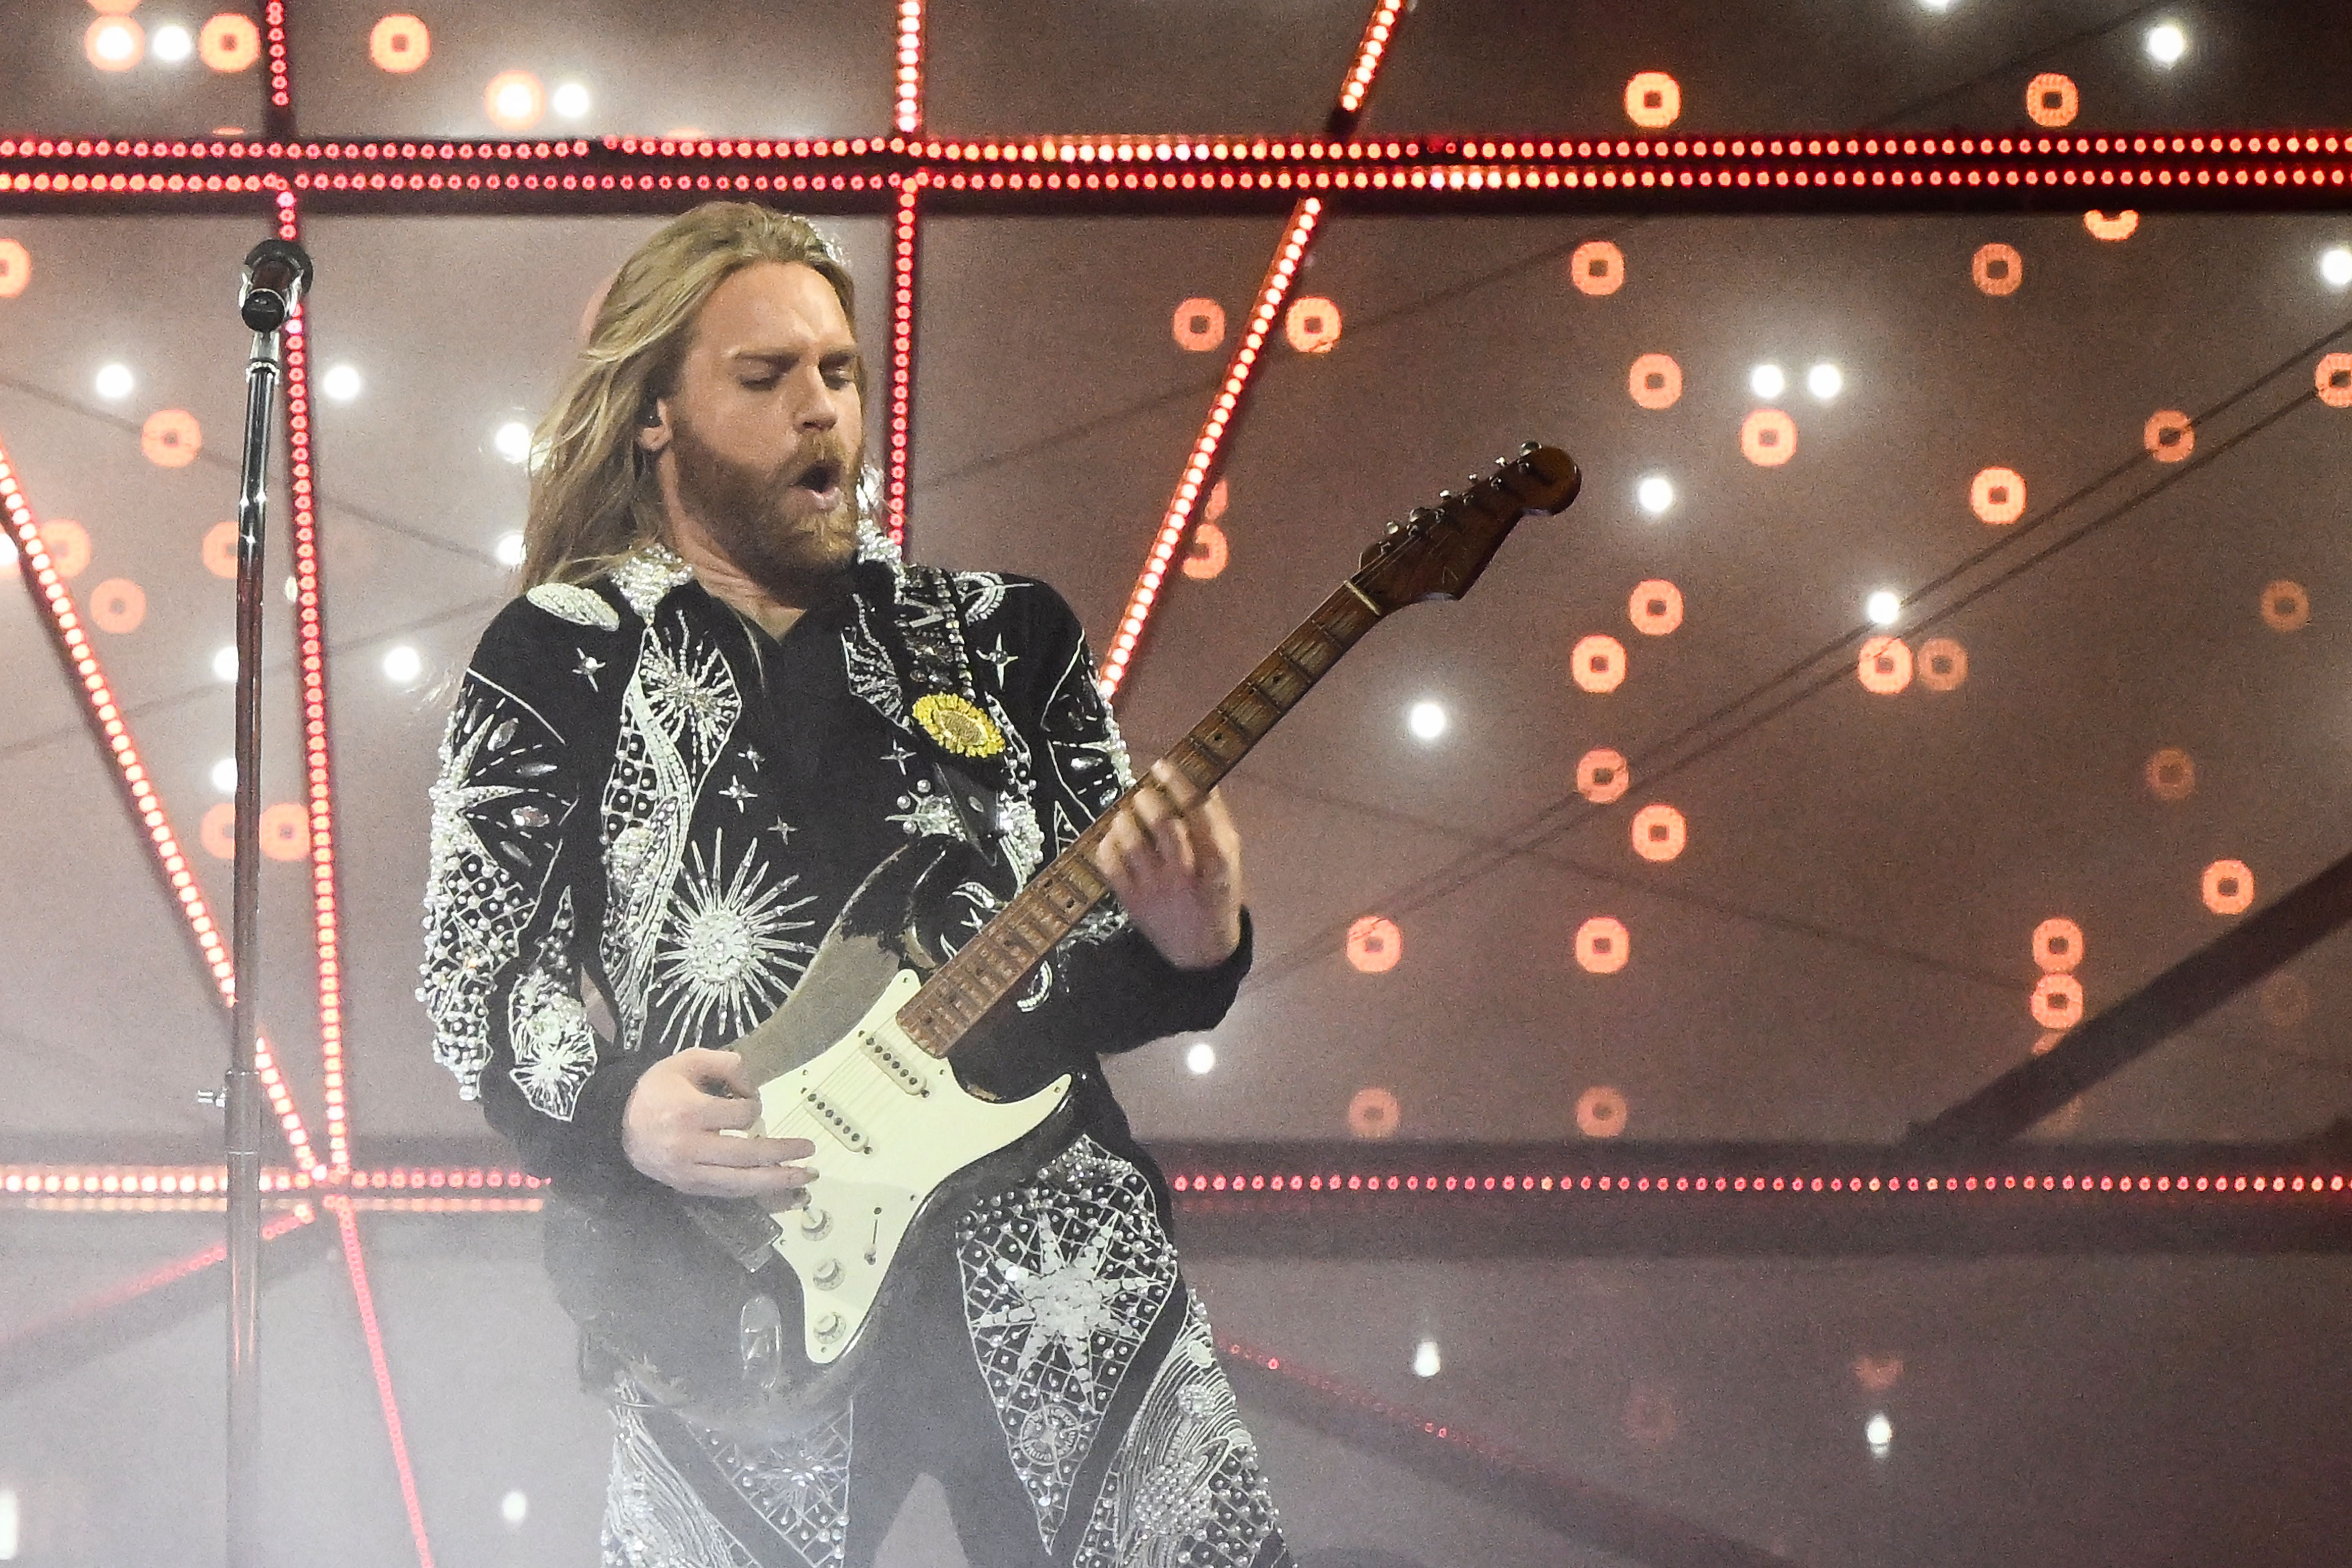 The UK’s Sam Ryder performs at the Eurovision final in Turin earlier this year